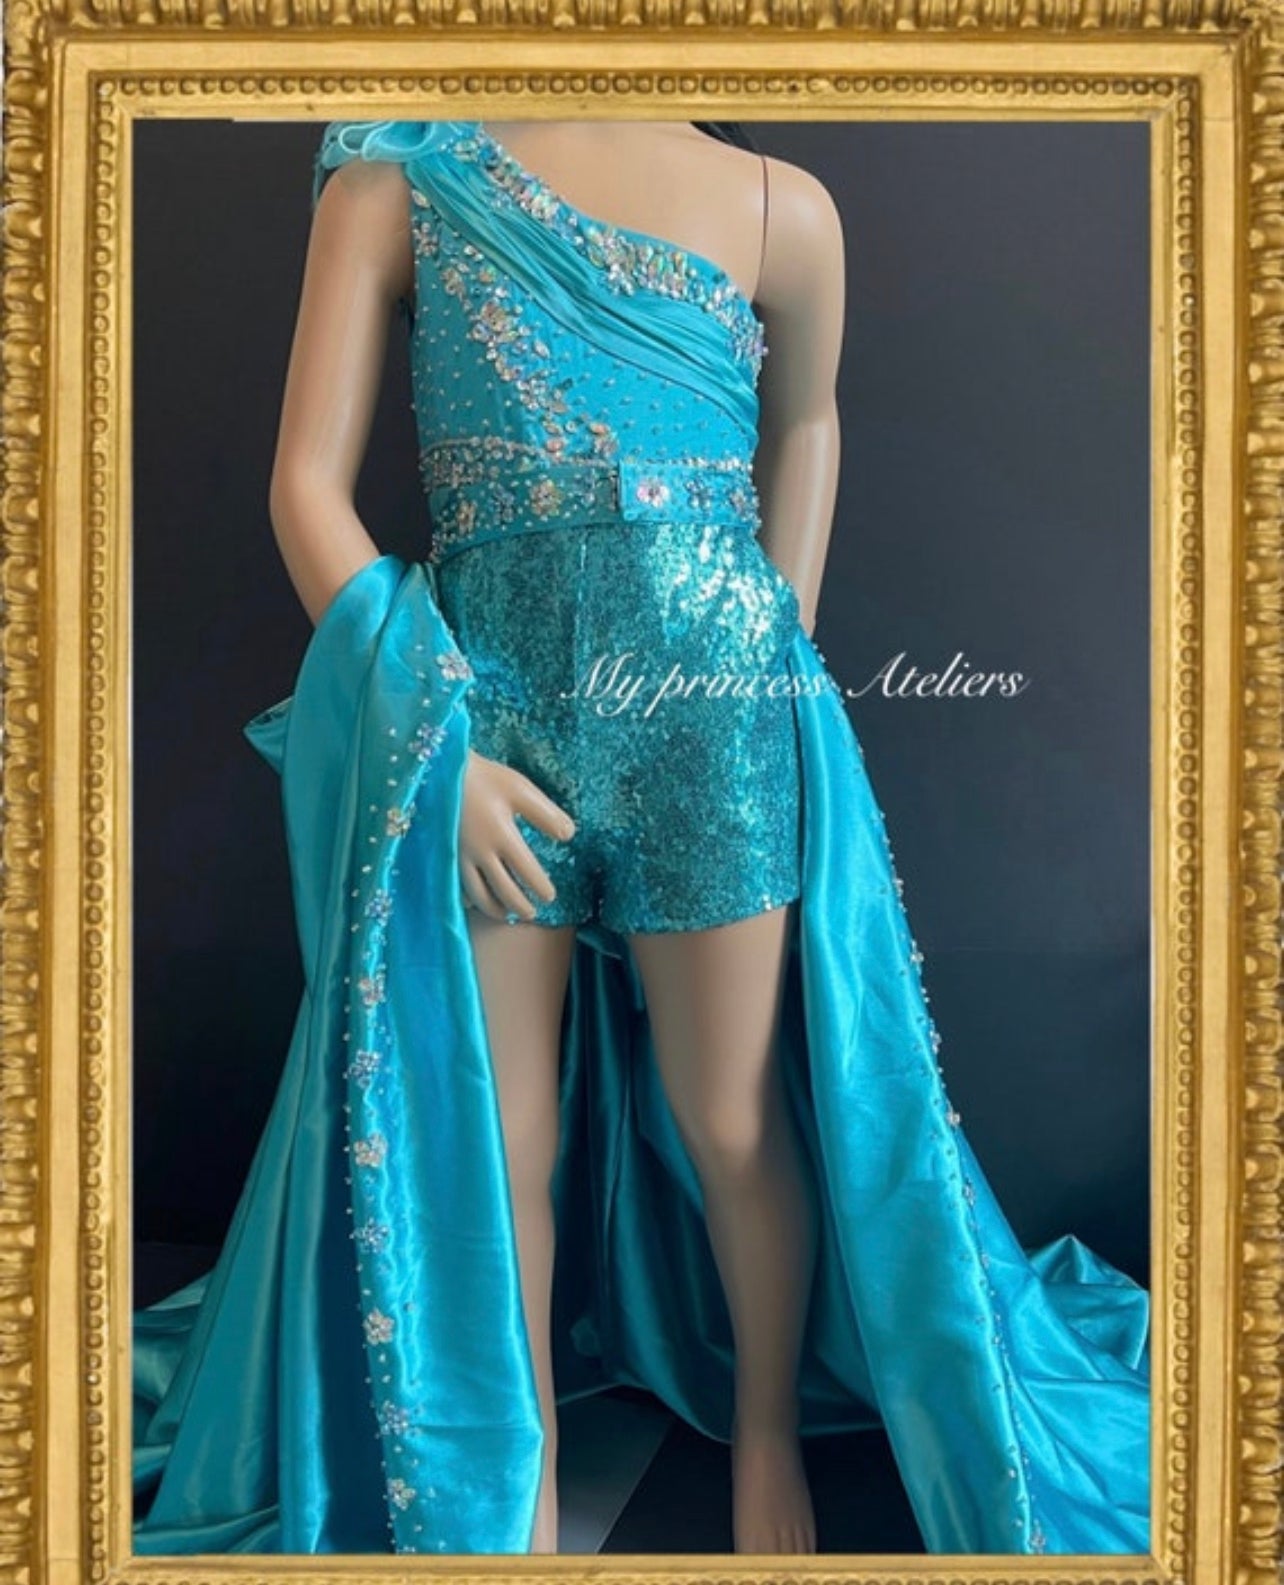 Fun Fashion pageant romper, Mermaid inspired couture birthday dress.